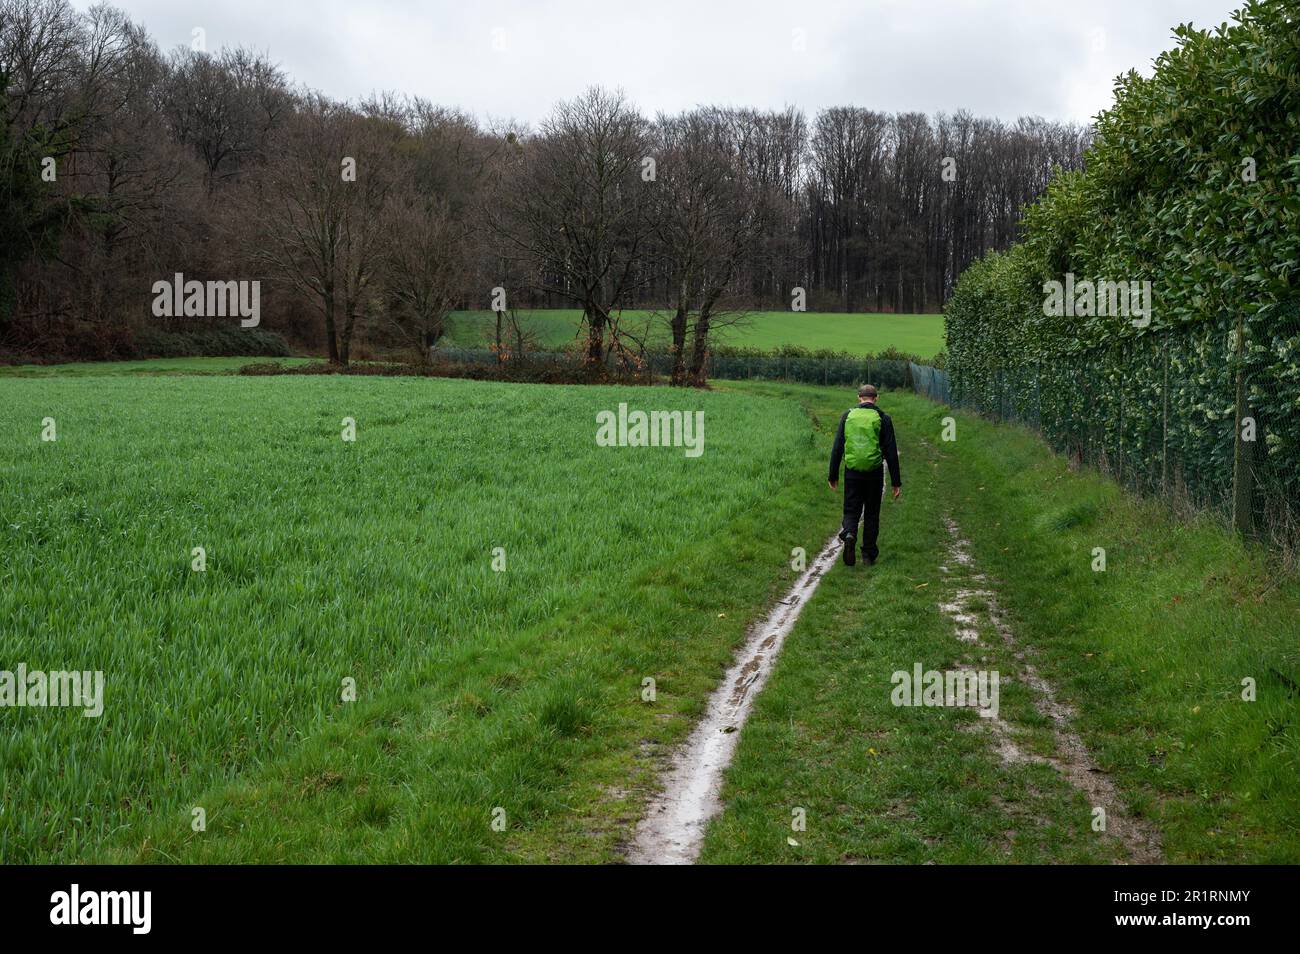 Kortenberg, Flemish Brabant Region, Belgium - April 1, 2023 - Young man with backpack walking through the green meadows at the Flemish countryside. Stock Photo